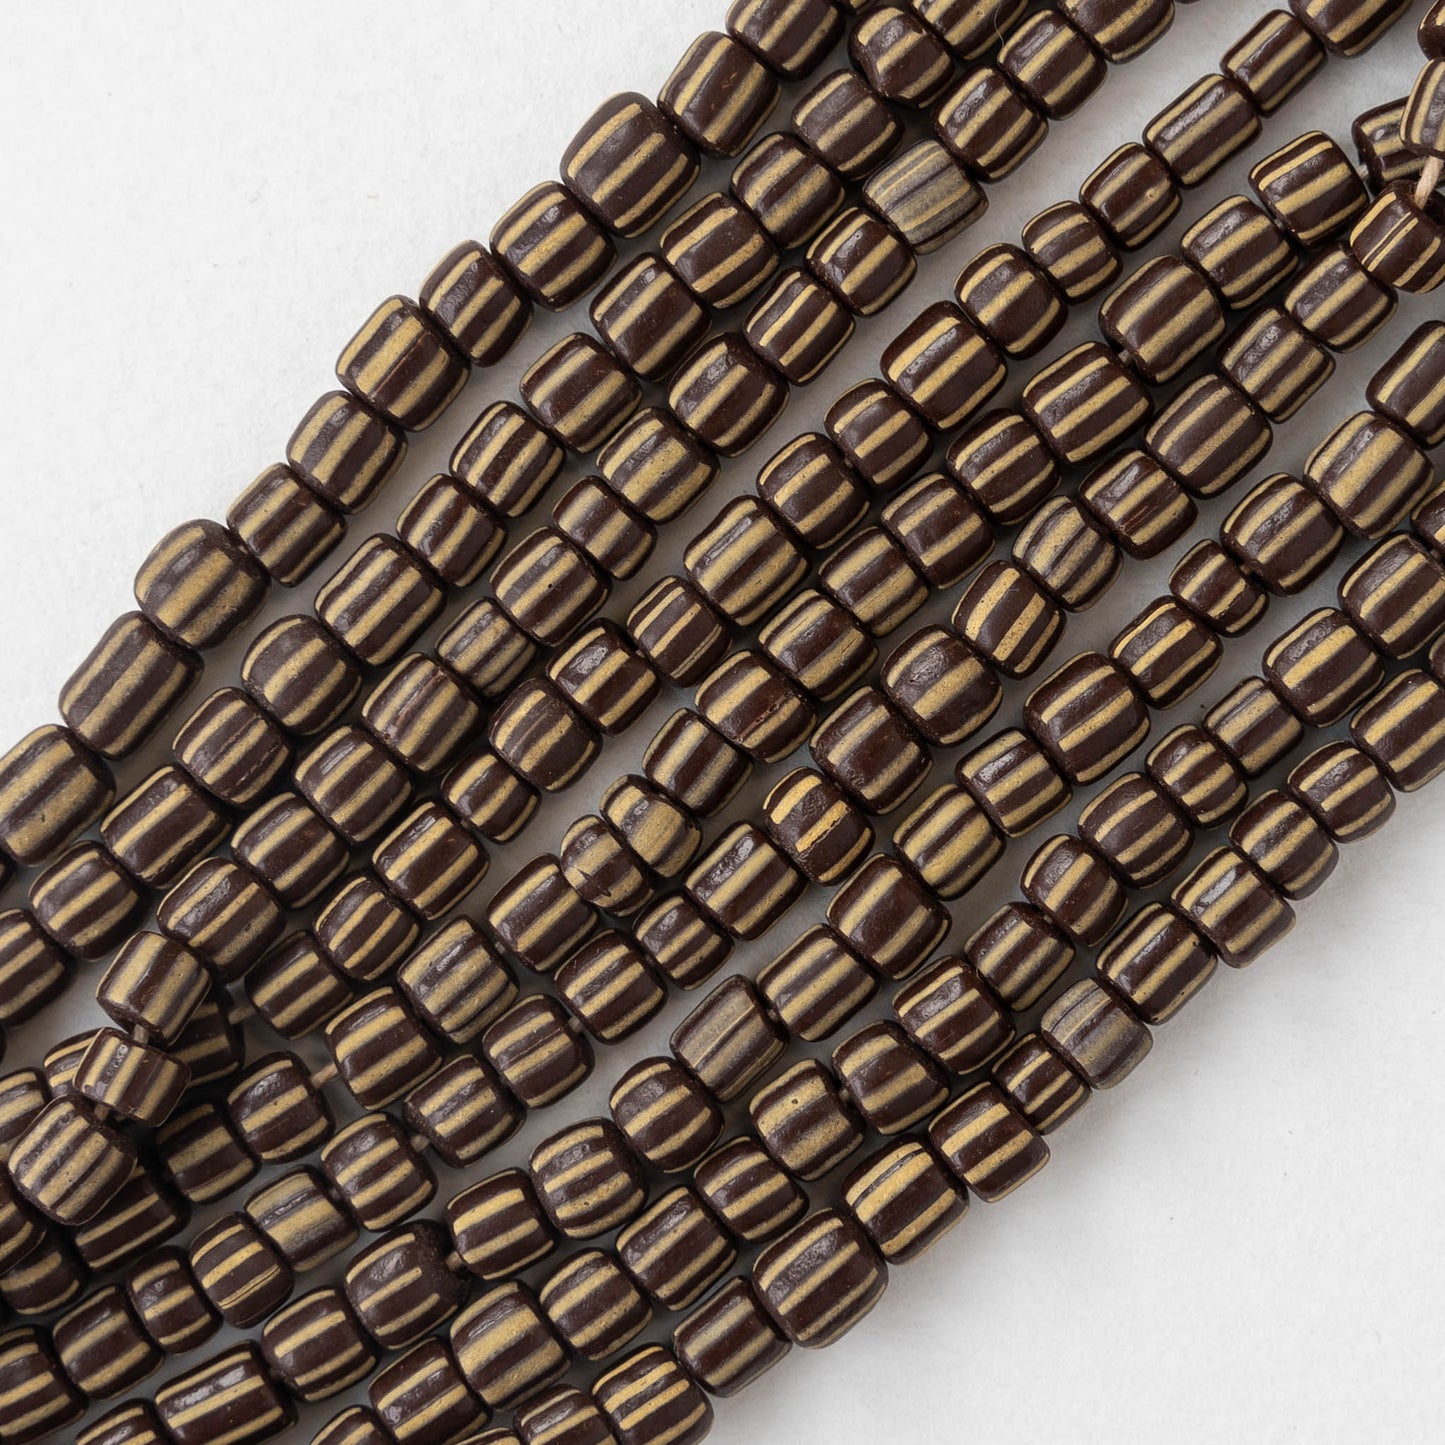 Java Trade Beads - Striped Brown - 12 Inches